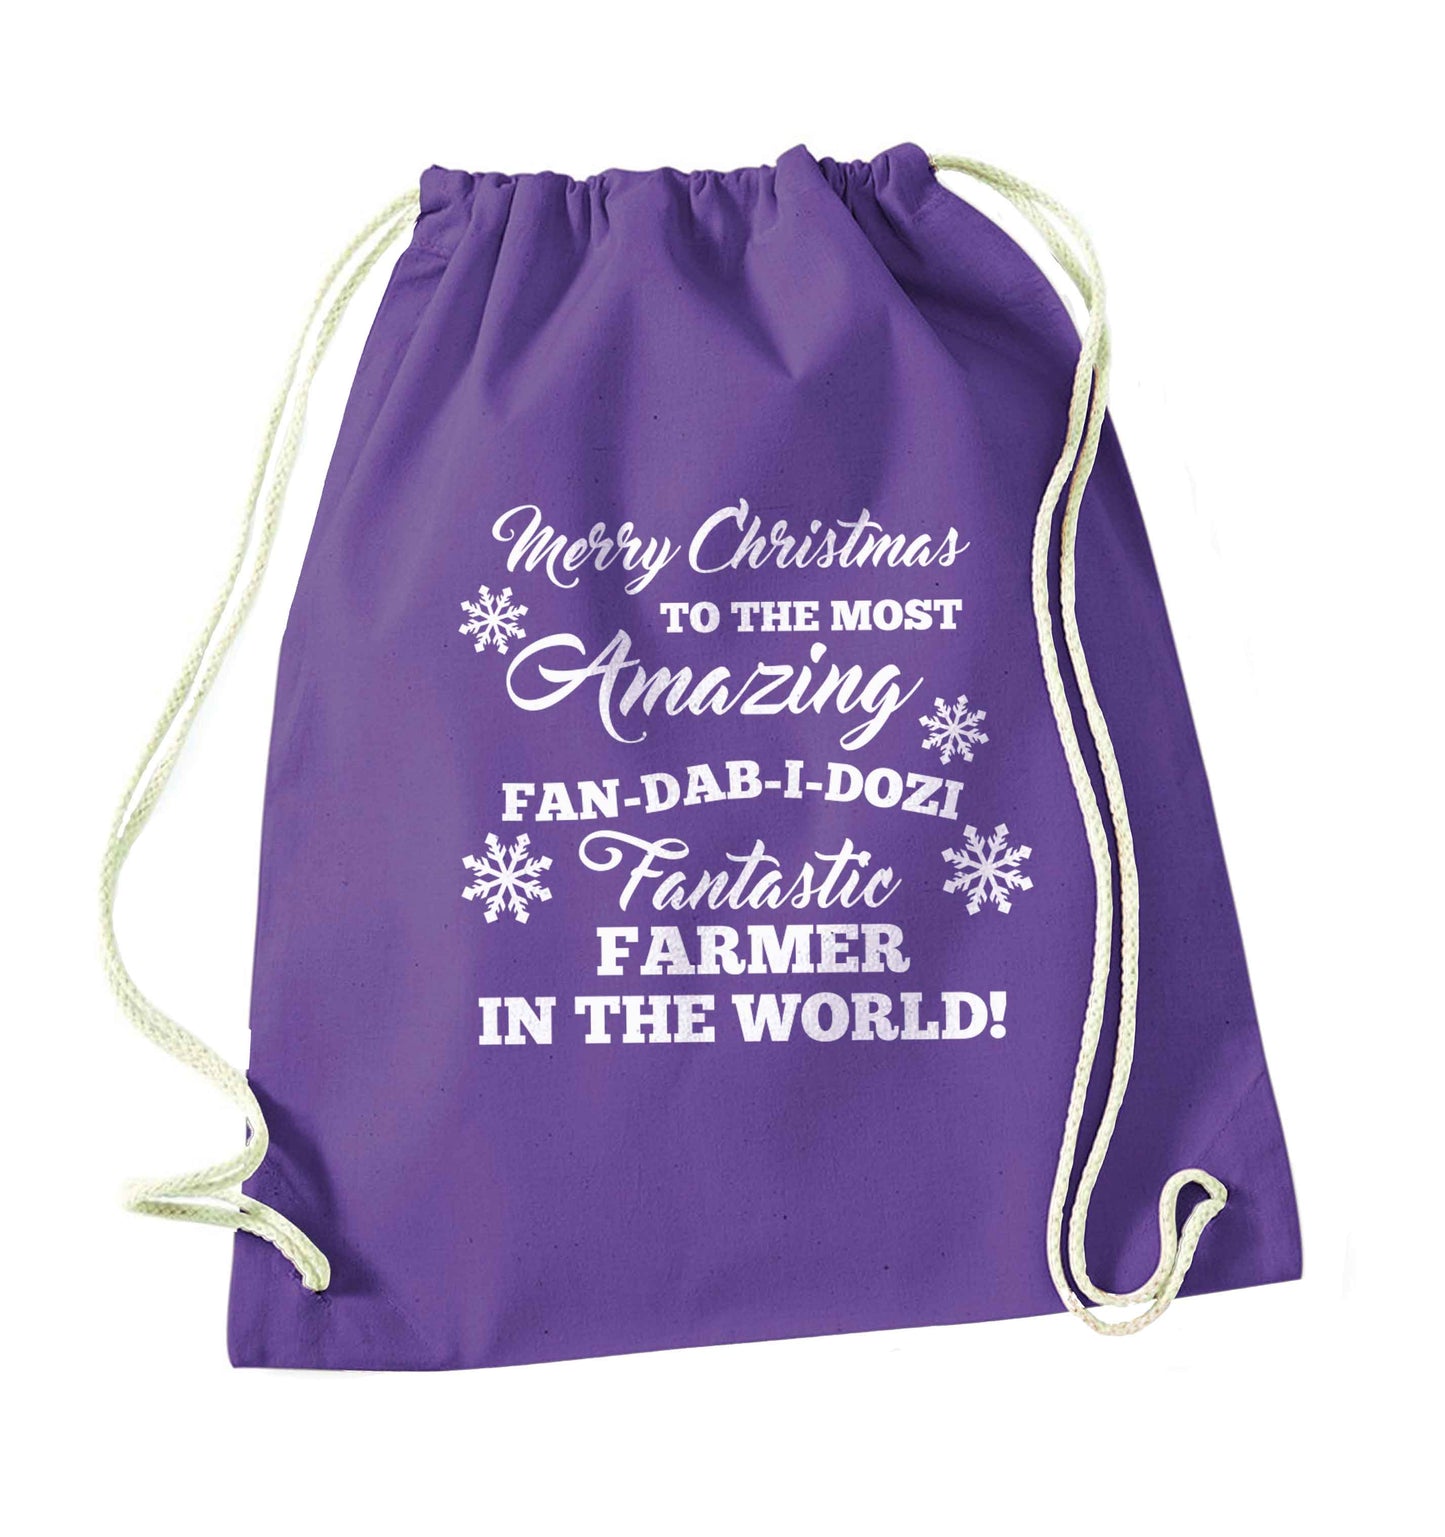 Merry Christmas to the most amazing farmer in the world! purple drawstring bag